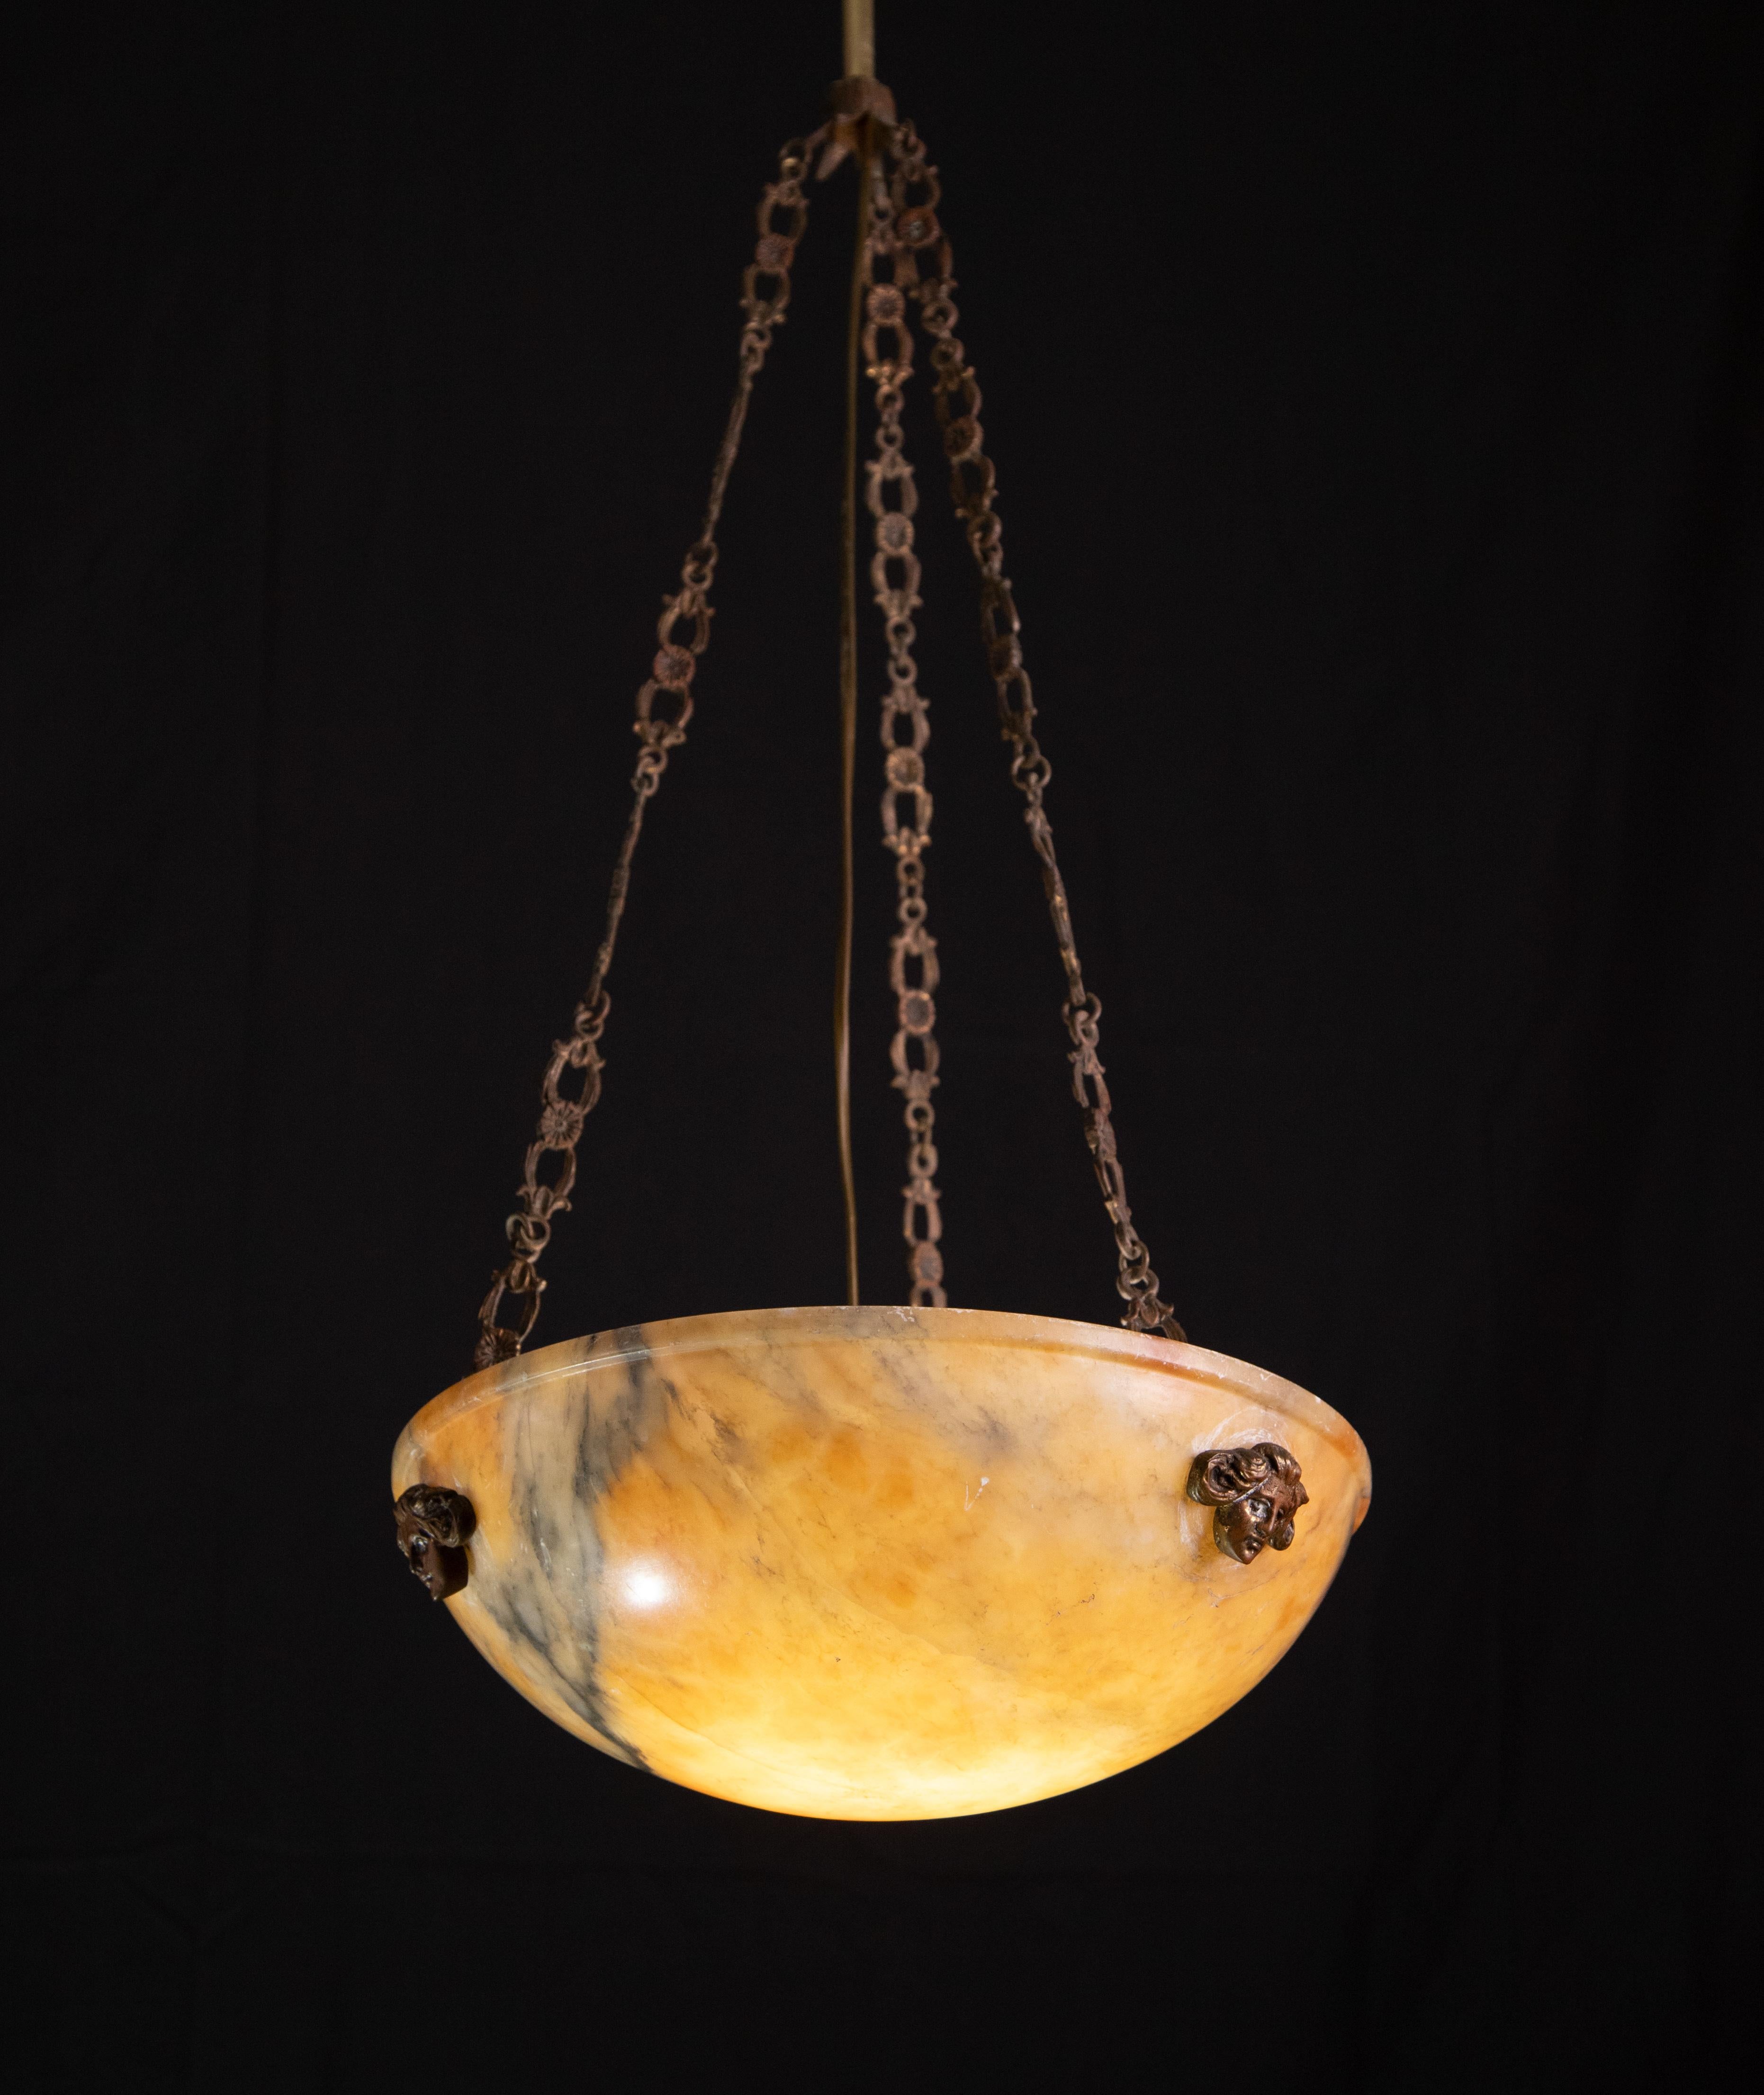 Antique orange alabaster hanging chandelier in Art Deco style, circa 1940s.
A unique piece in orange alabaster, beautifully worked with hues and reflections of other colors when lit, still suspended from the three original chains, the chandelier is